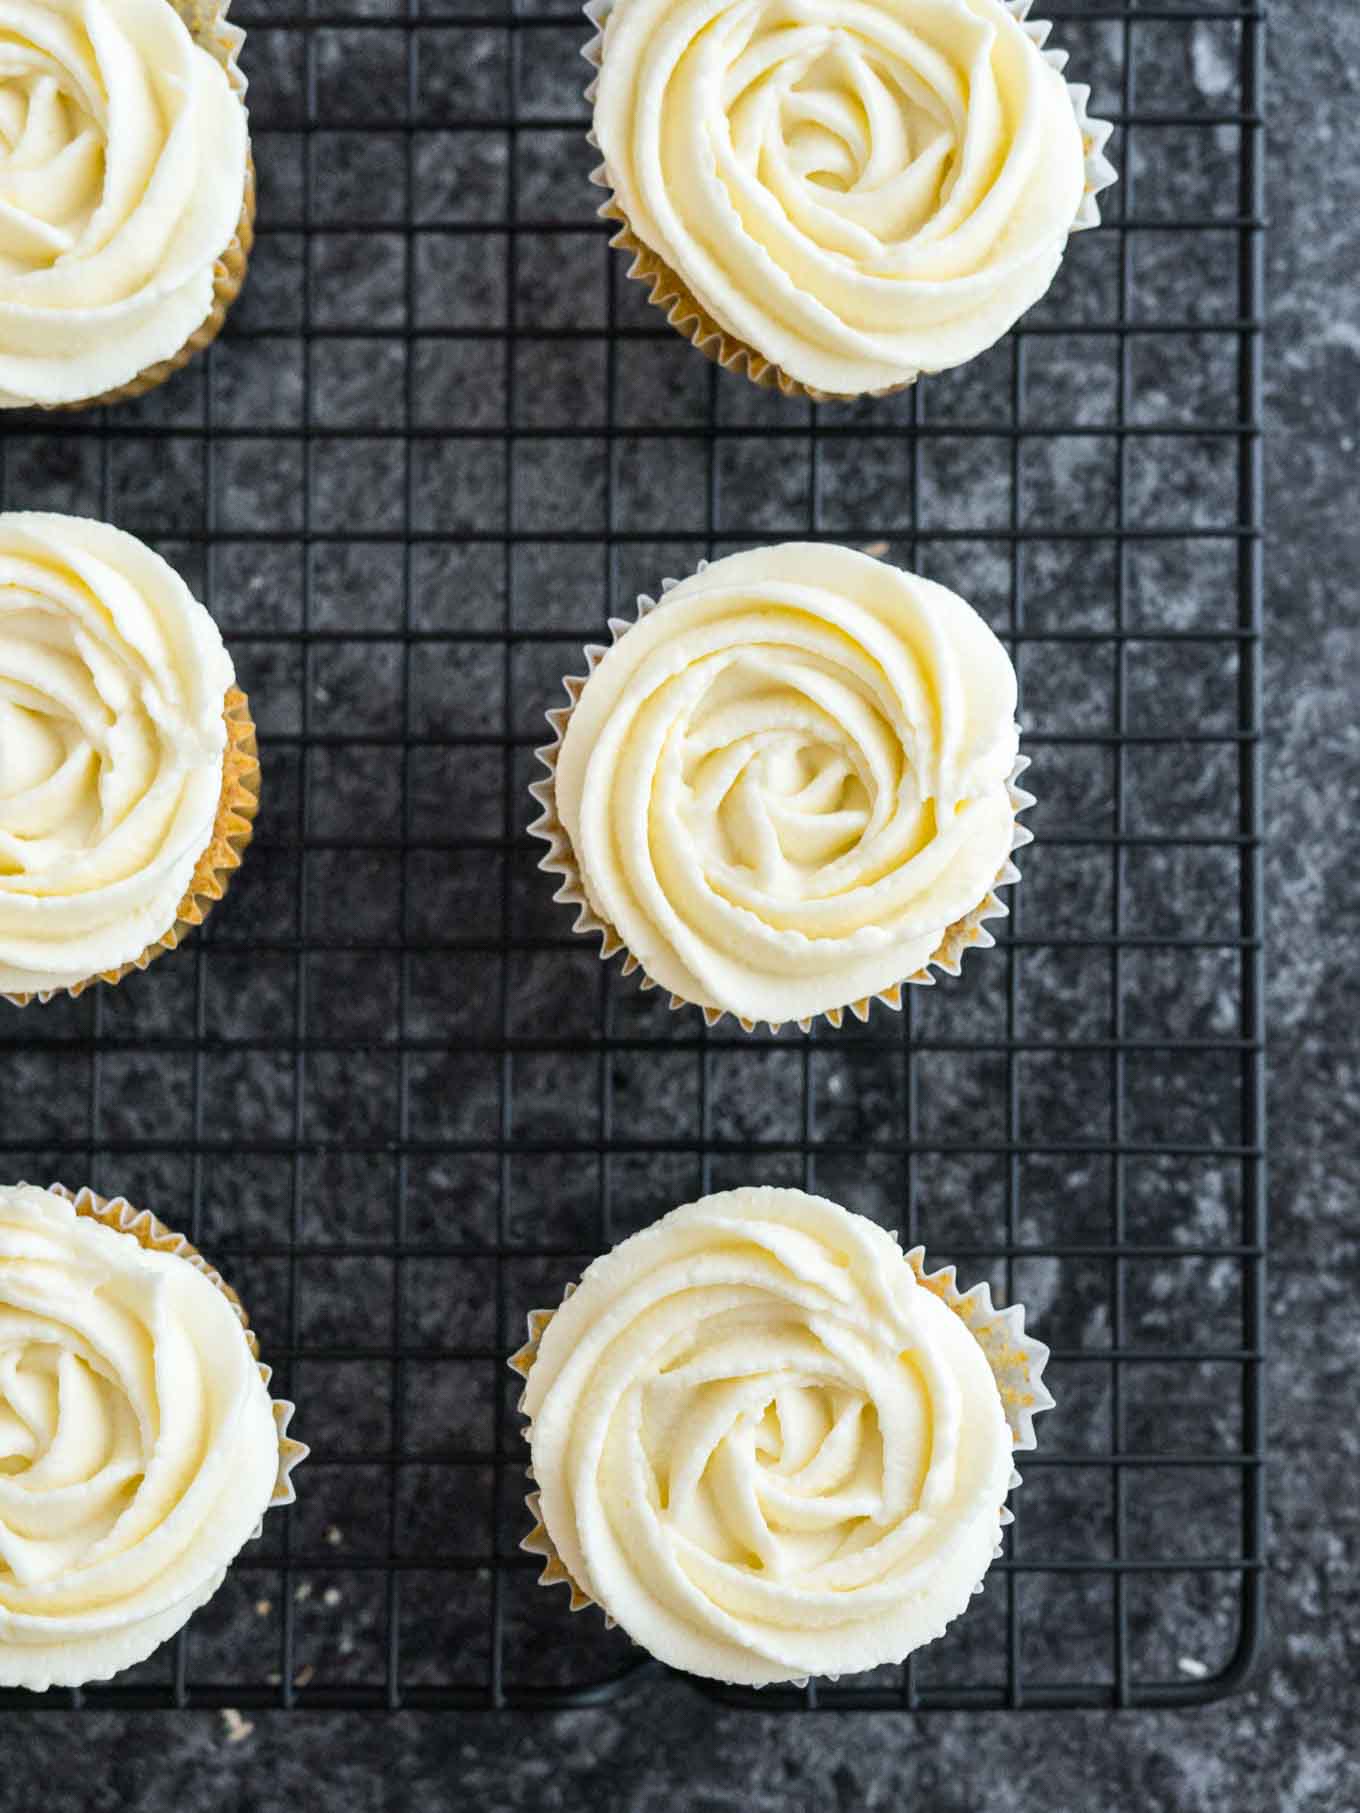 Frosted cupcakes on a cooling rack.